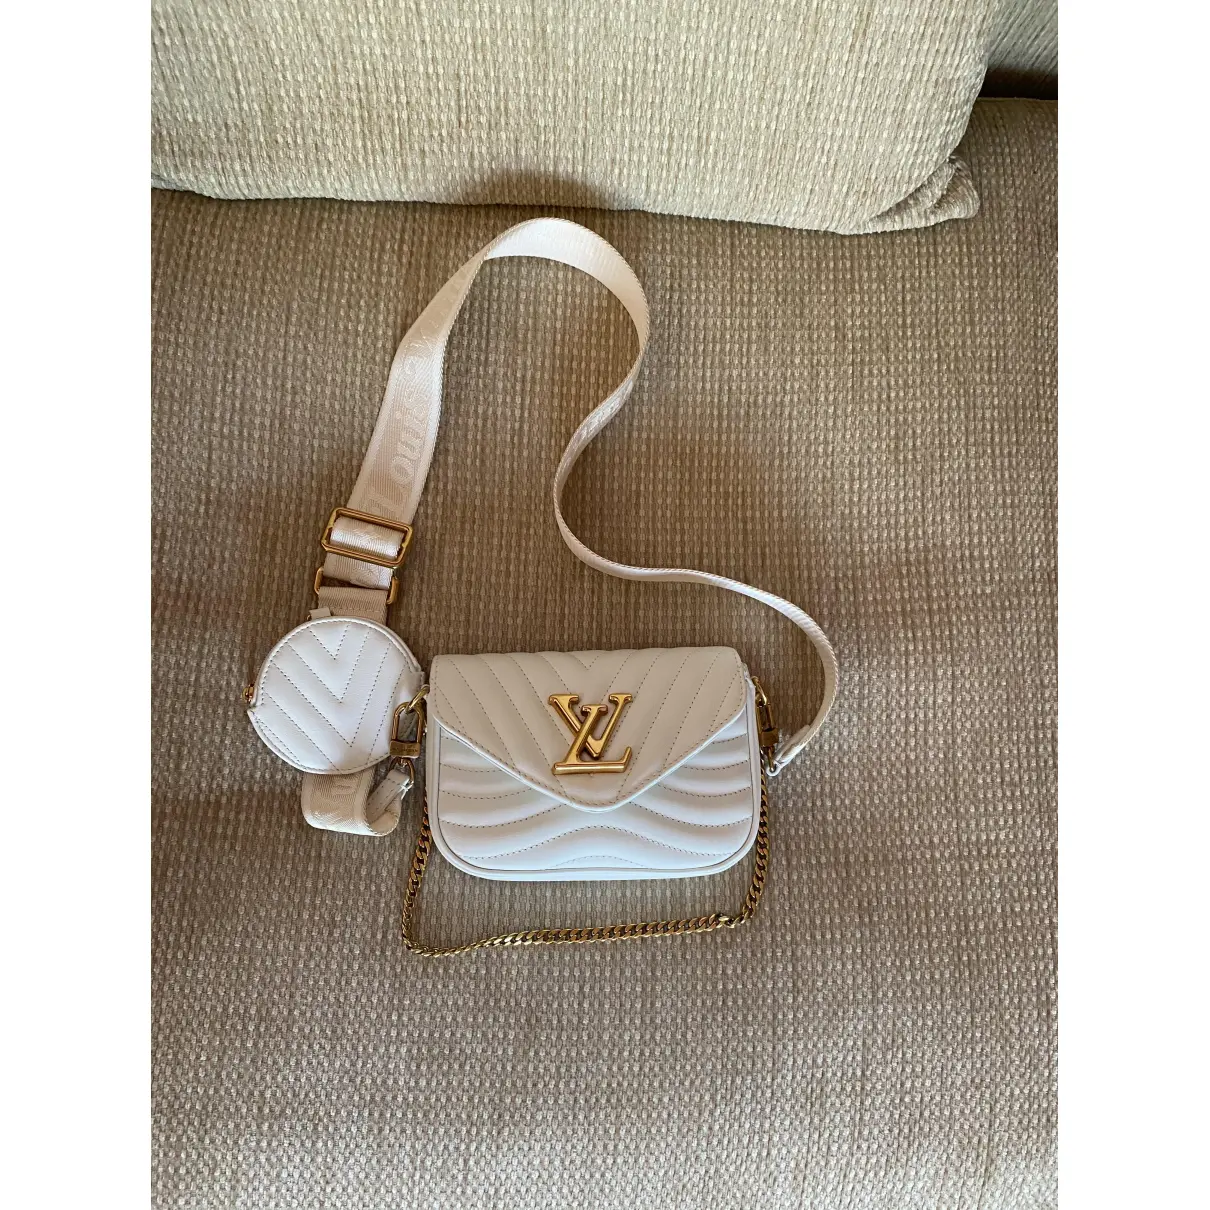 Buy Louis Vuitton New Wave leather crossbody bag online